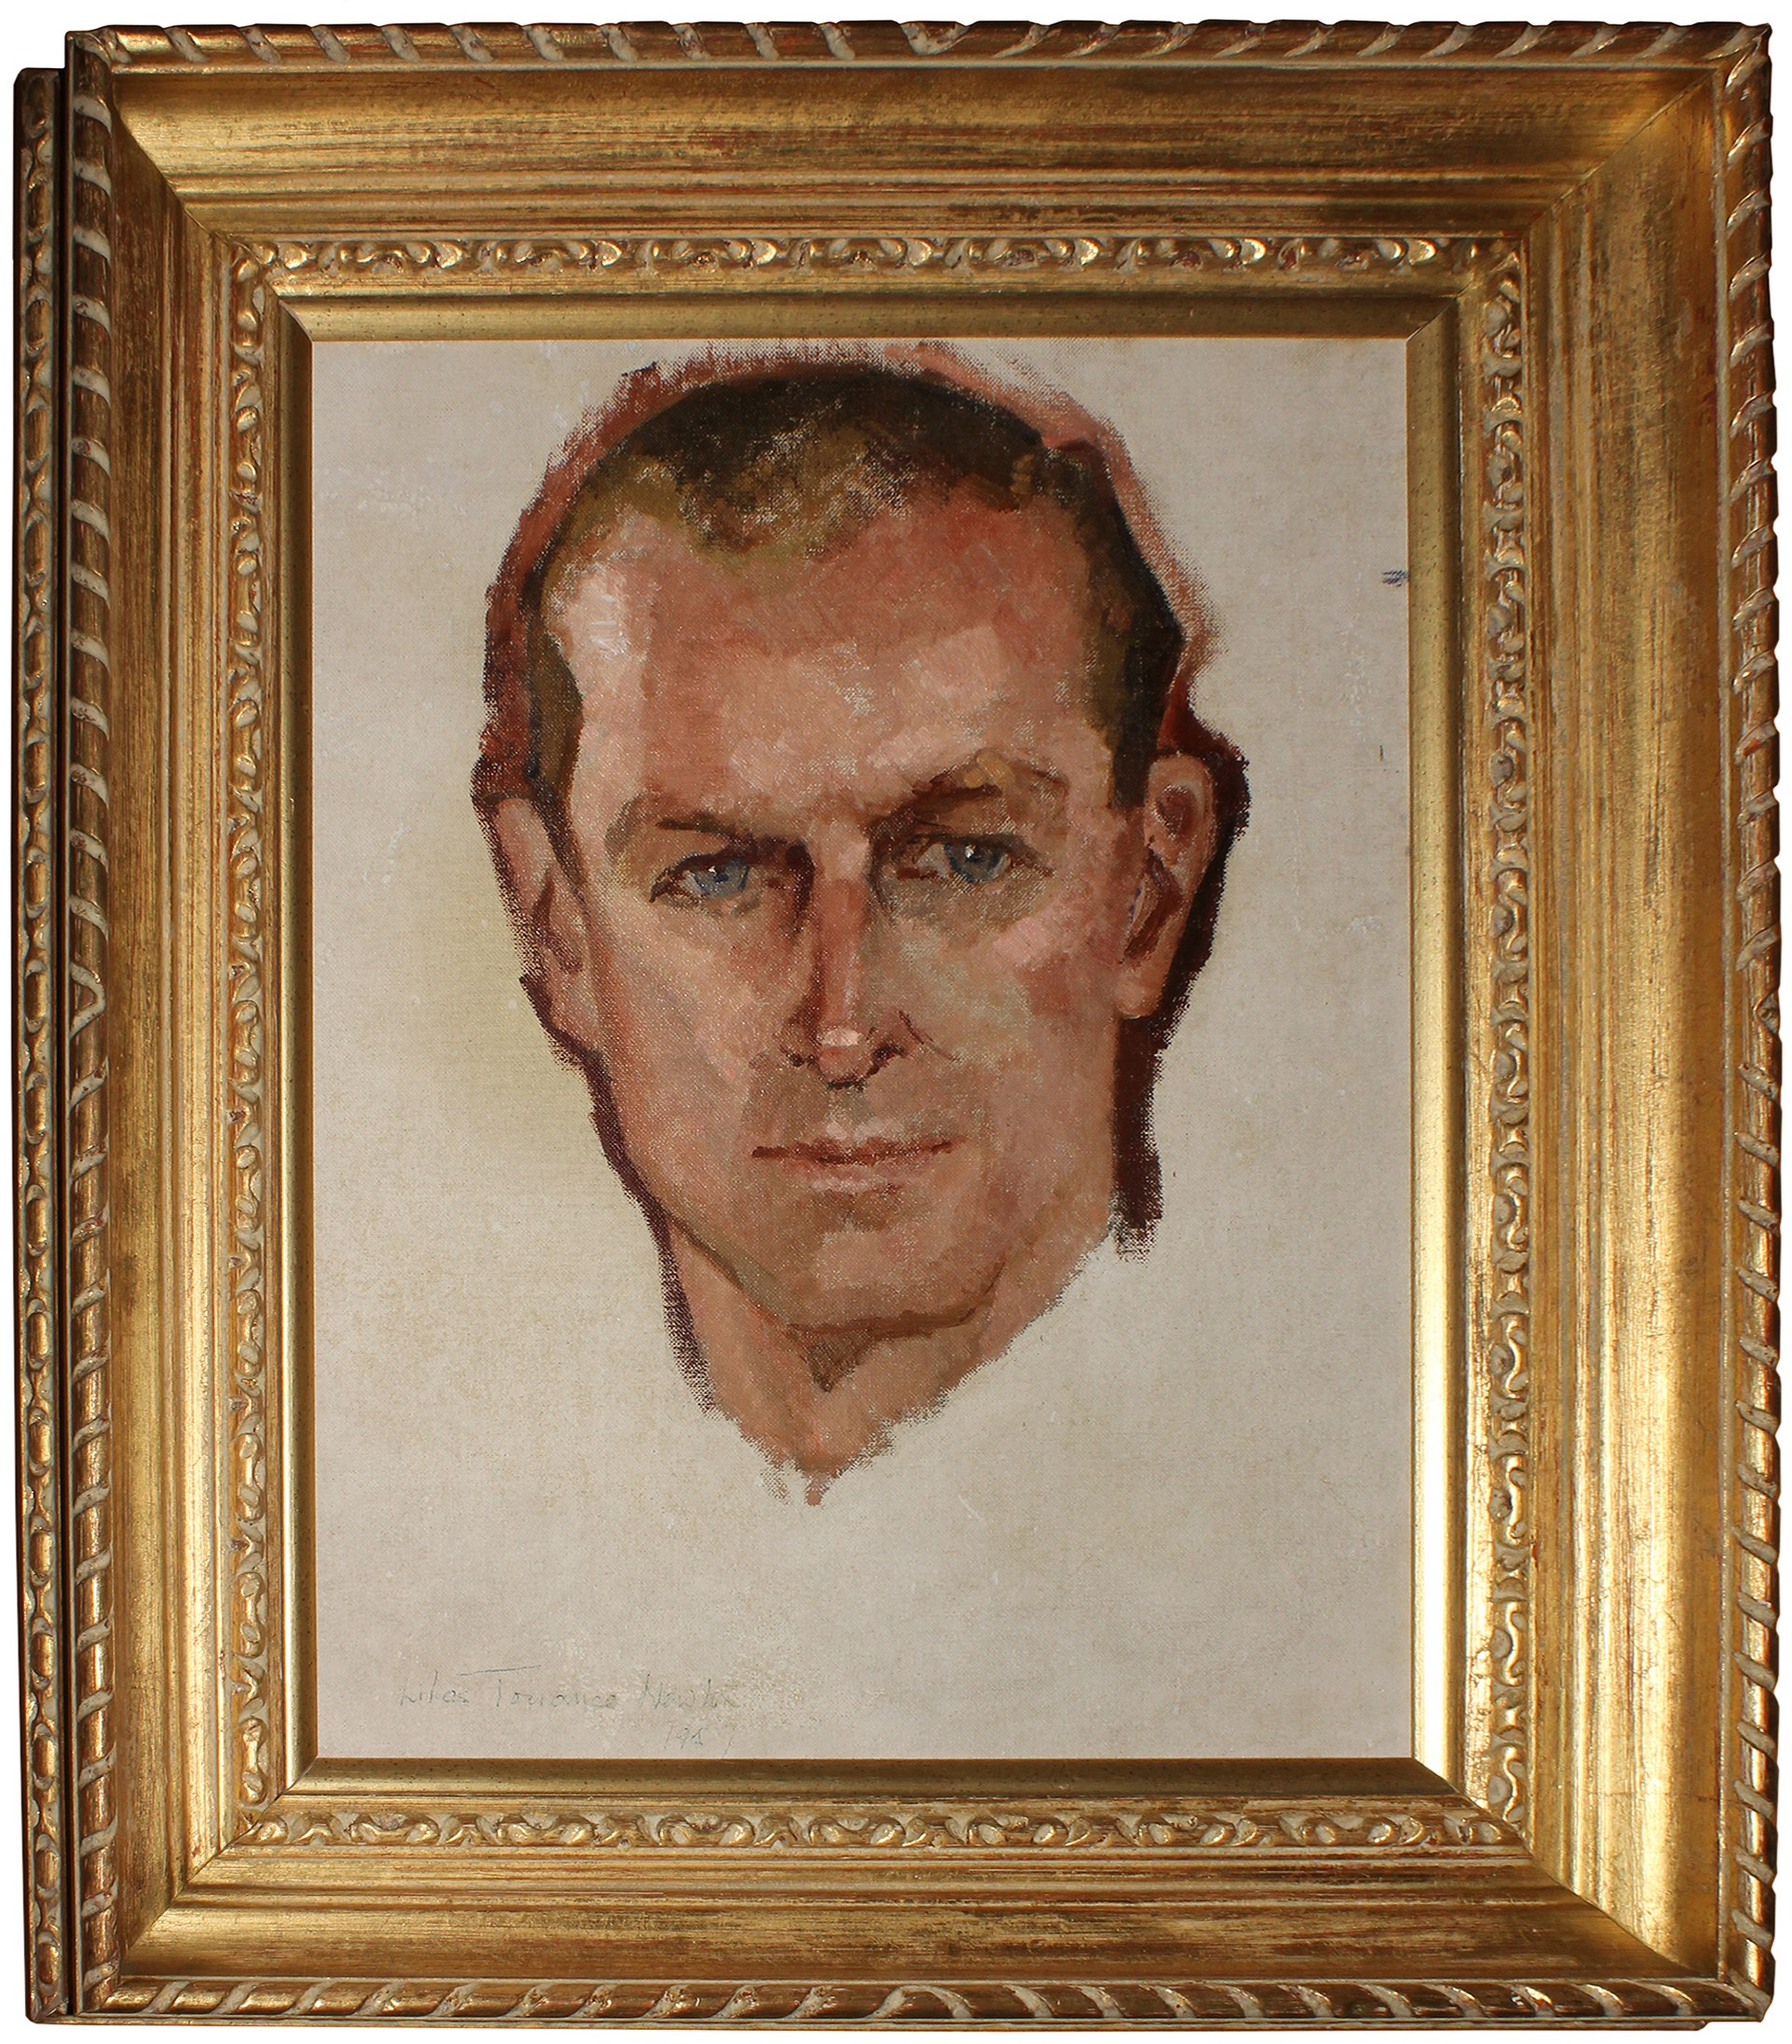 Lilias Torrance Newton’s small portrait of Prince Philip hangs in the Reading Room in the Senate of Canada Building. (Image courtesy of the National Capital Commission)